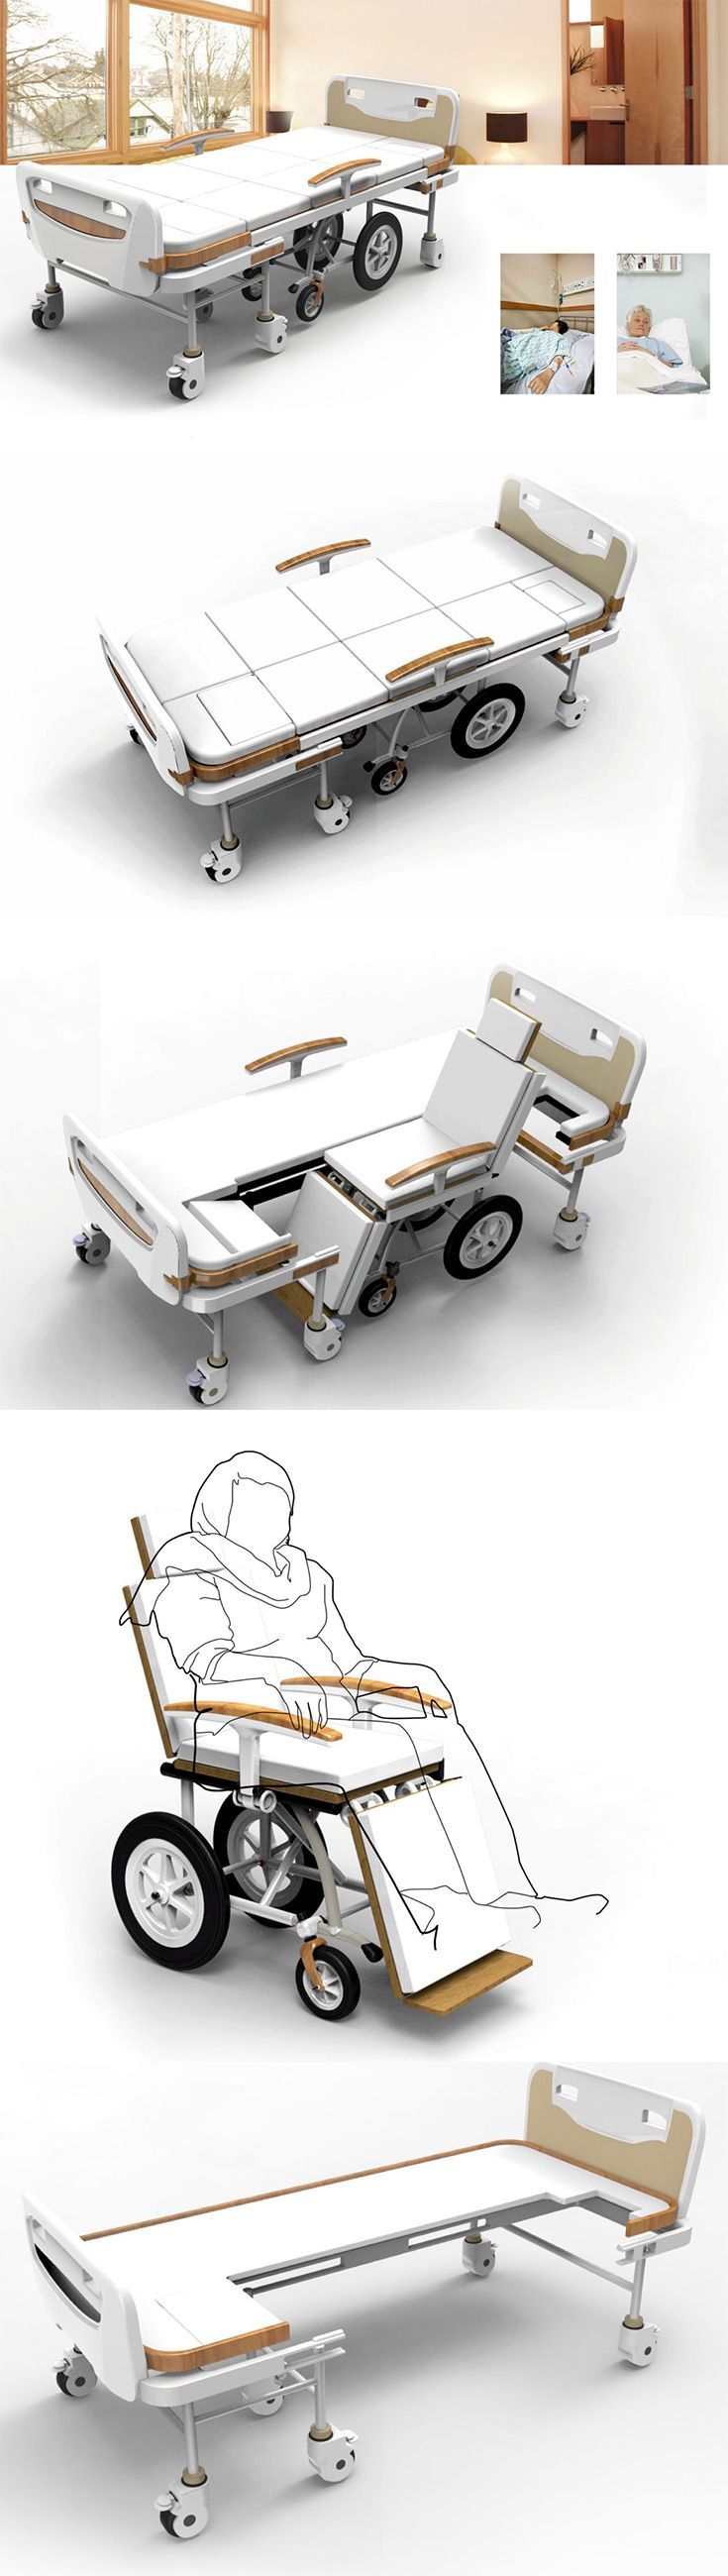 The LOHAS bed can be folded and transformed into a wheelchair in a matter of minutes without disturbing the patient with the help